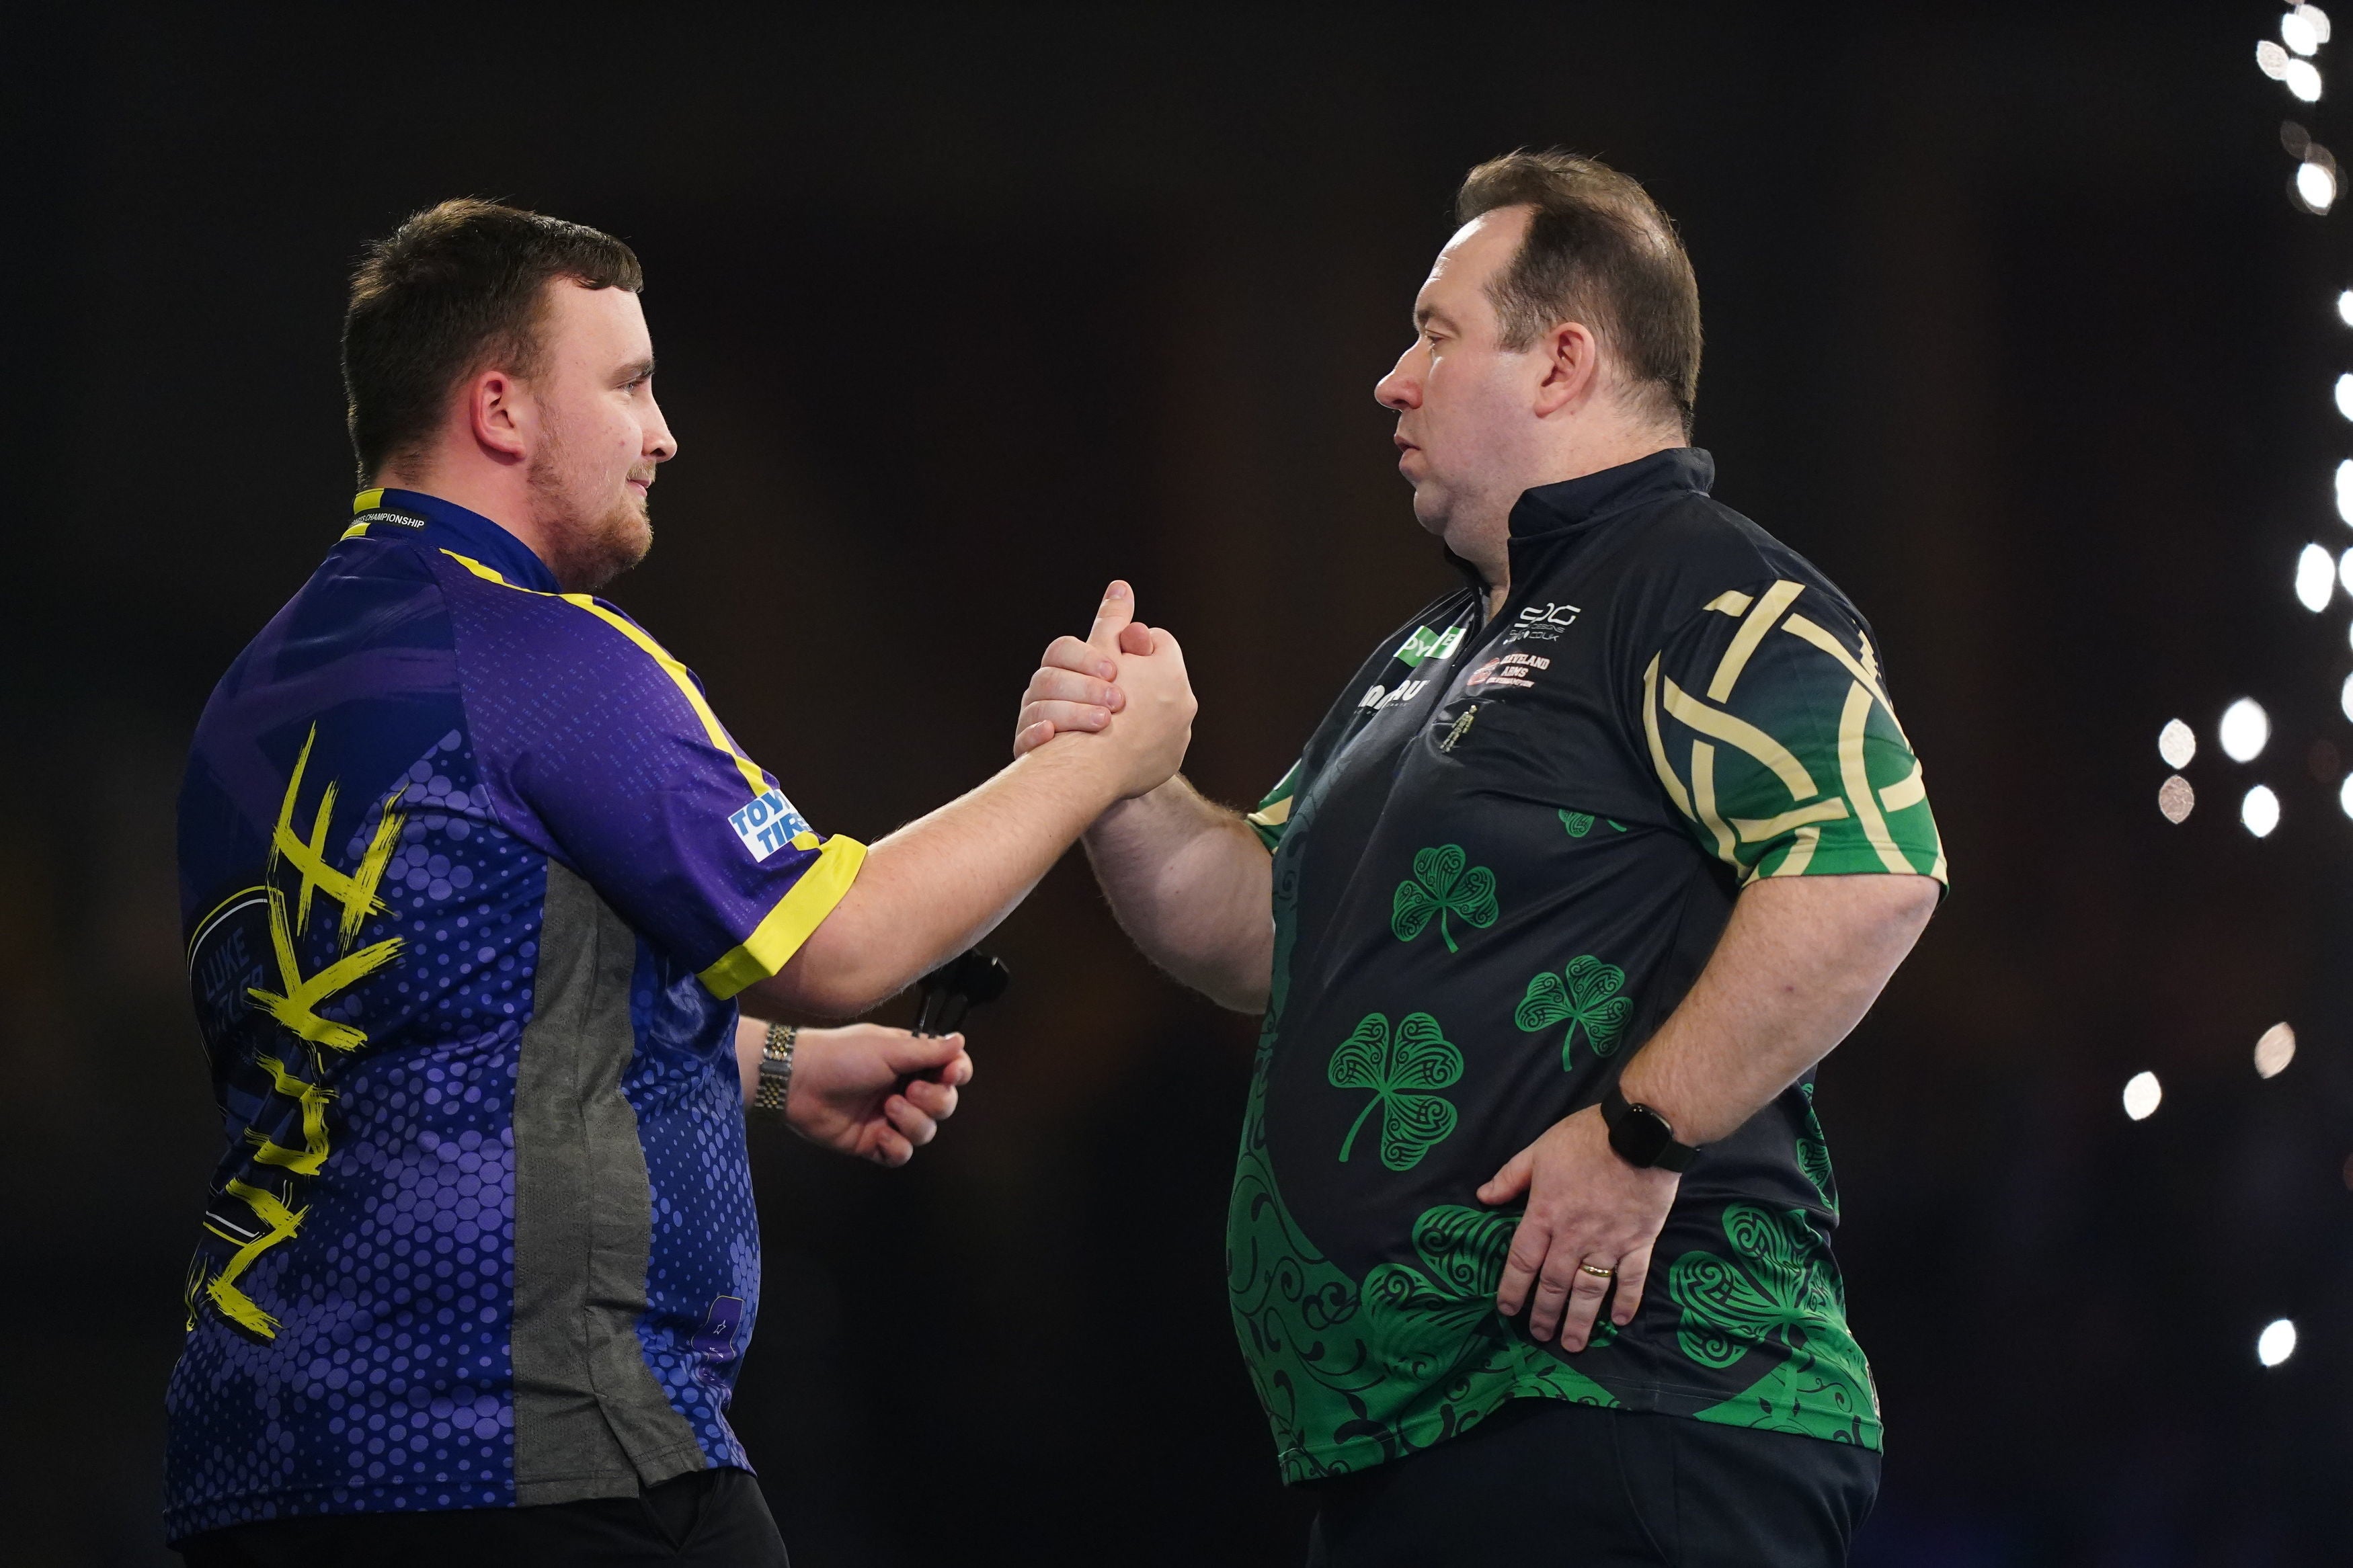 Brendan Dolan became Littler’s latest defeated opponent at Alexandra Palace